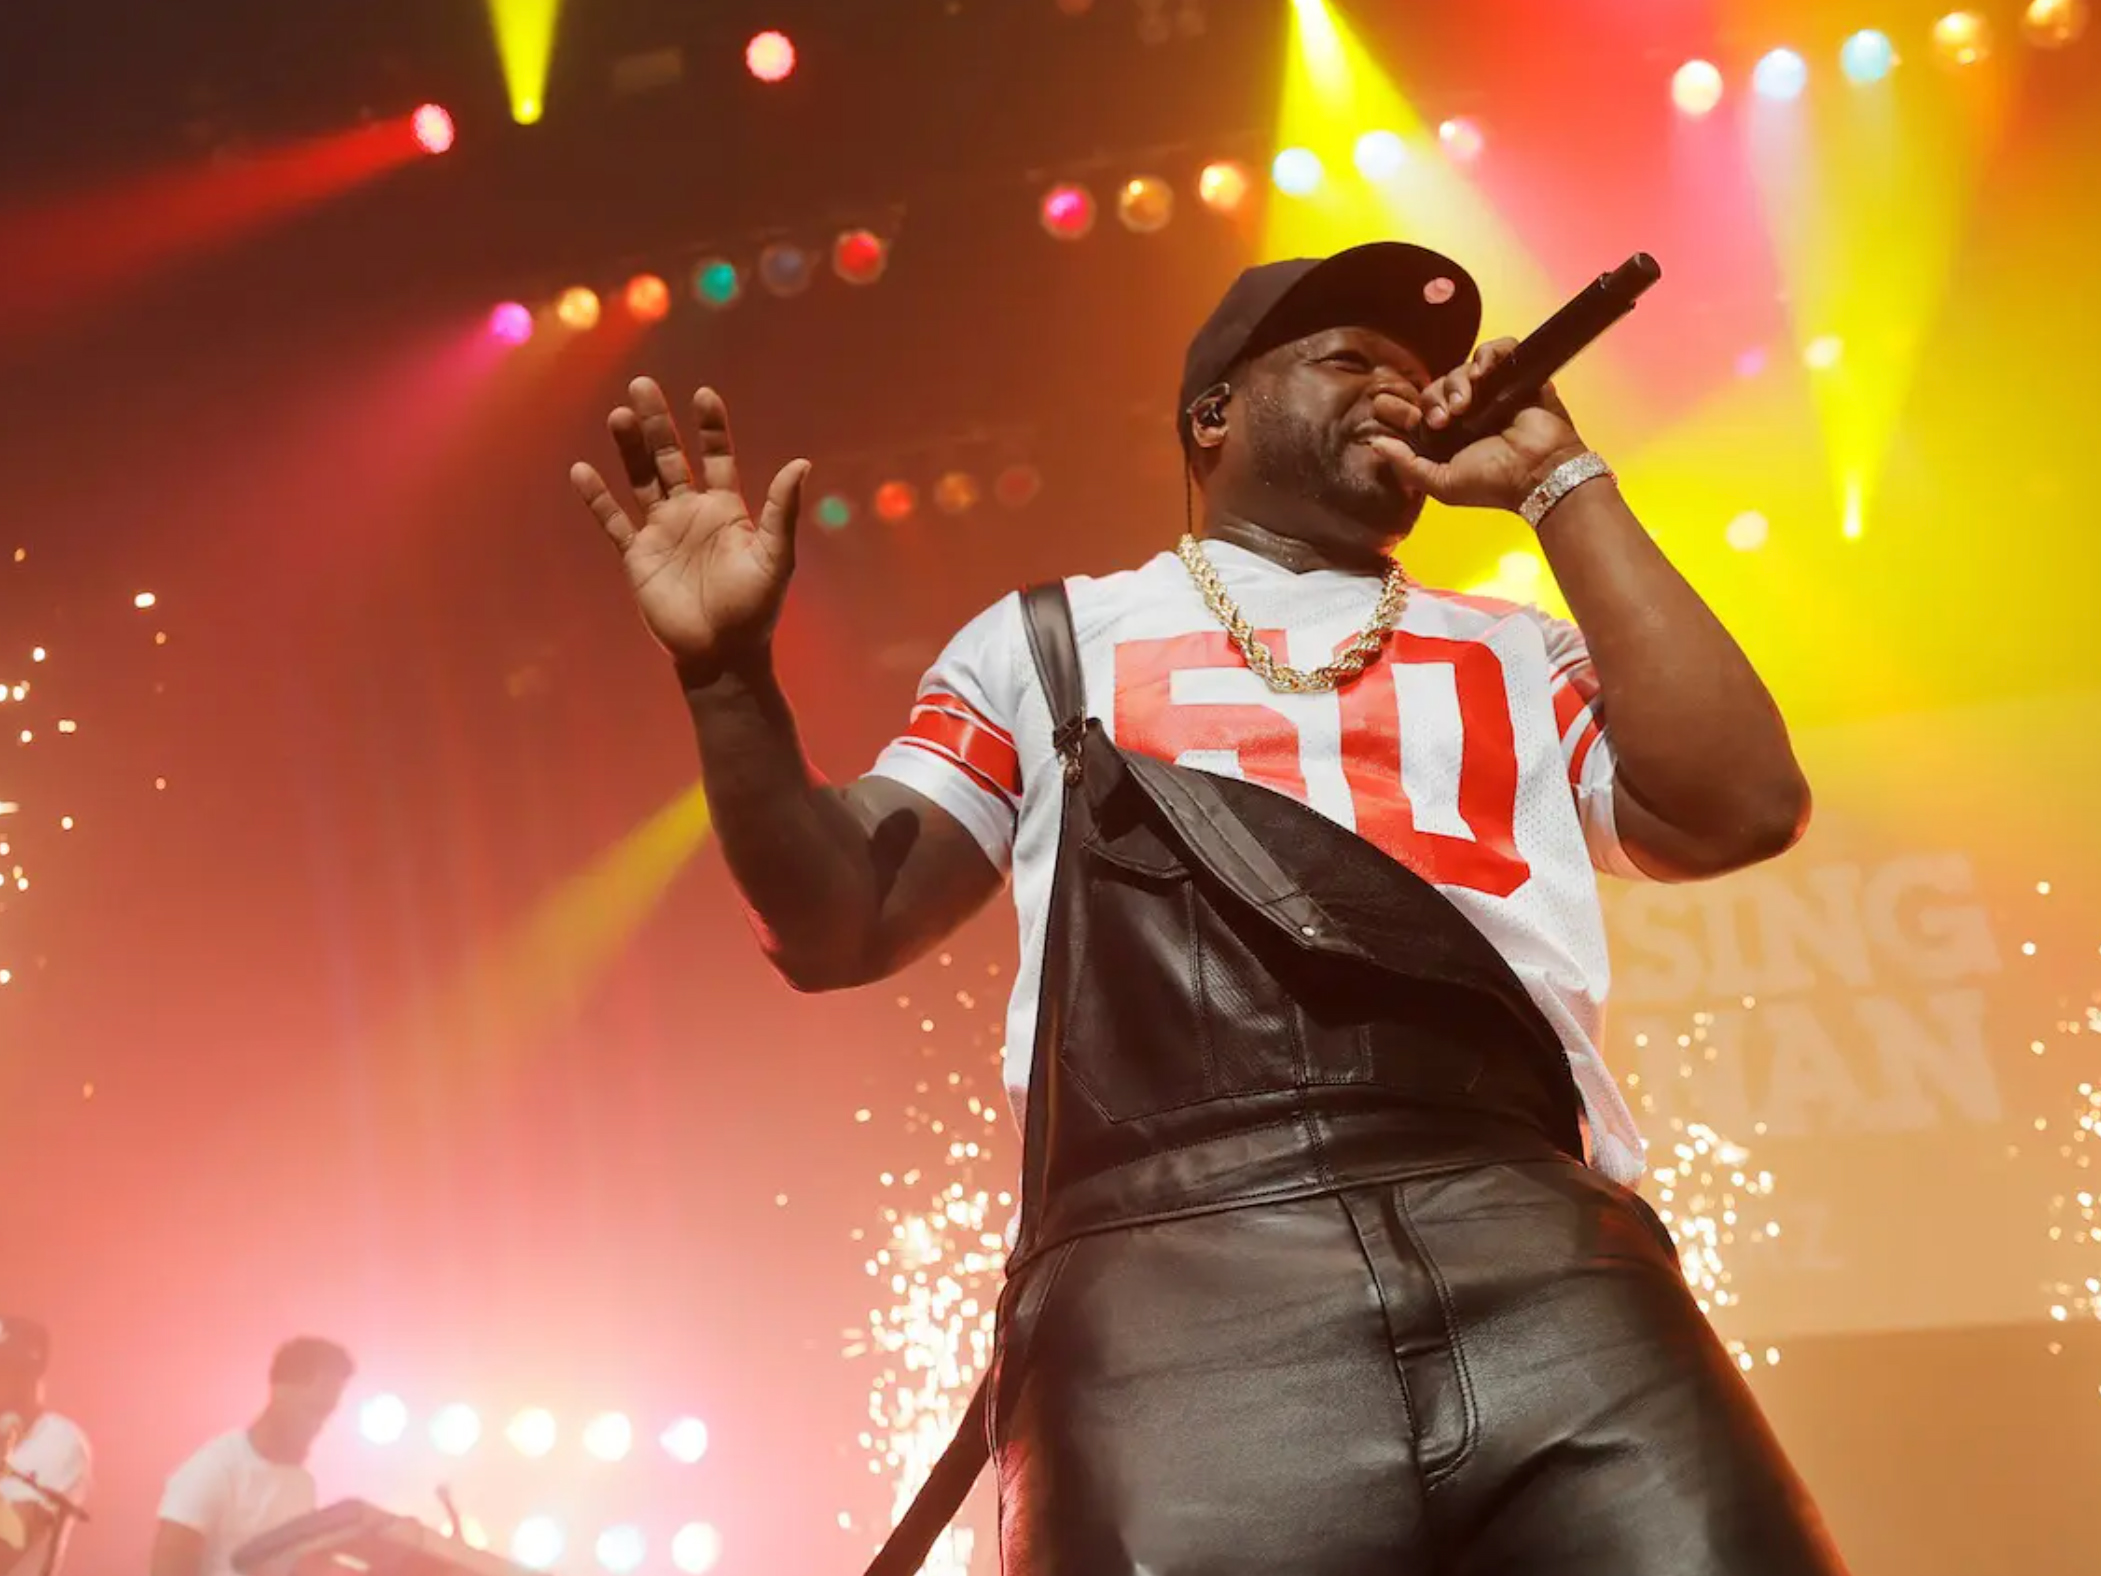 50 Cent, Busta Rhymes & Jeremih at Veterans United Home Loans Amphitheater